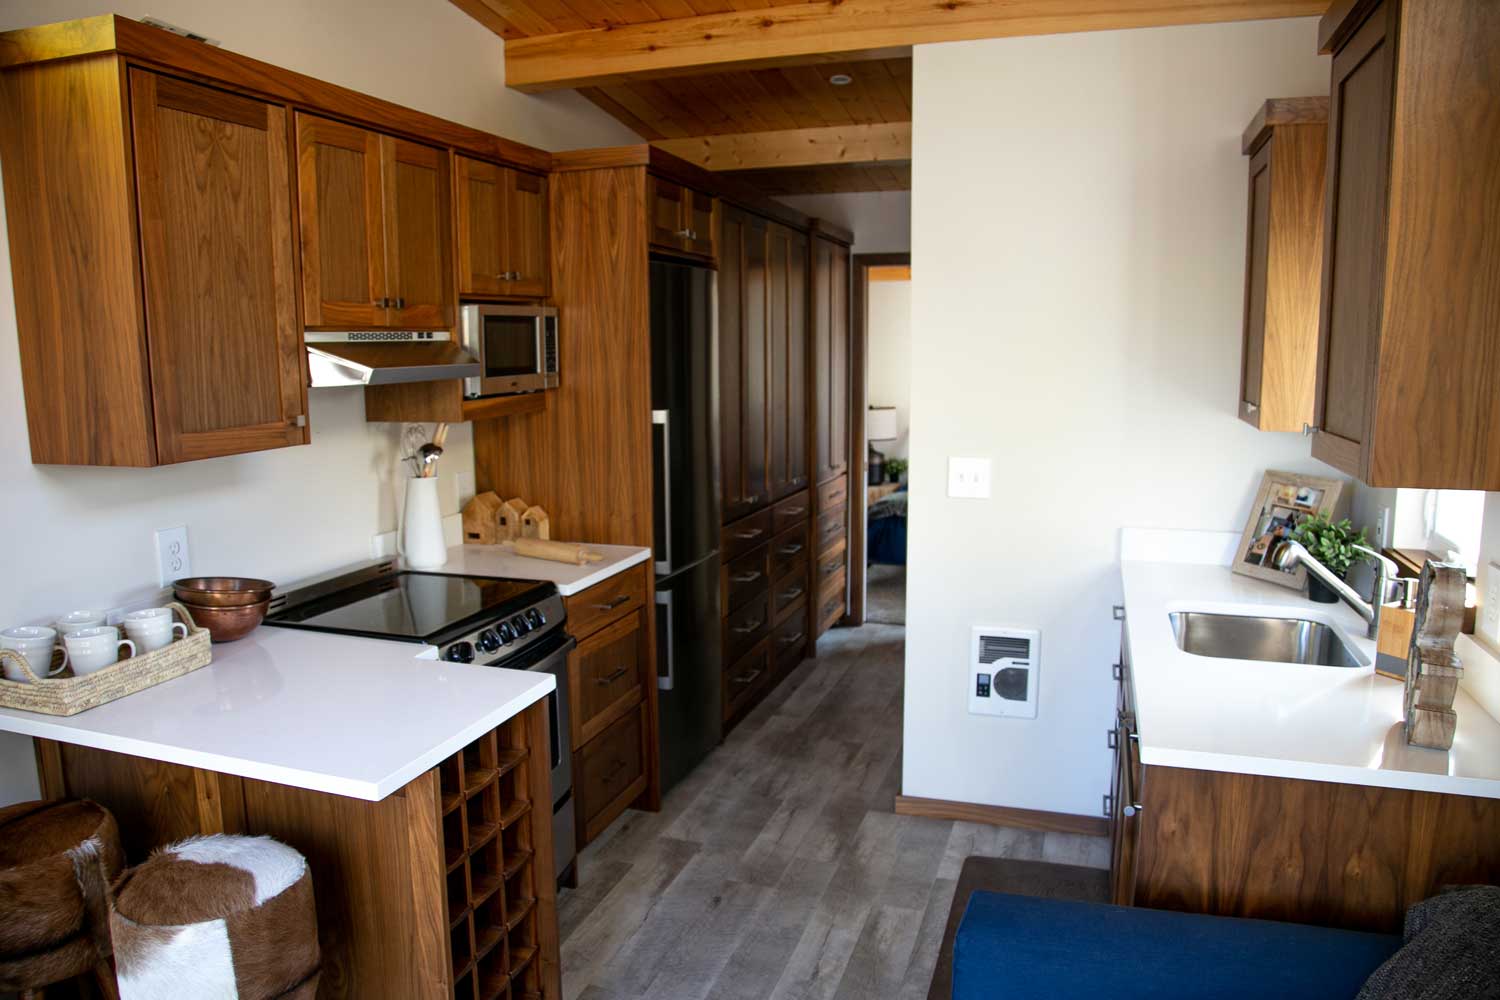 Kitchen of custom tiny house called the Log Cabin